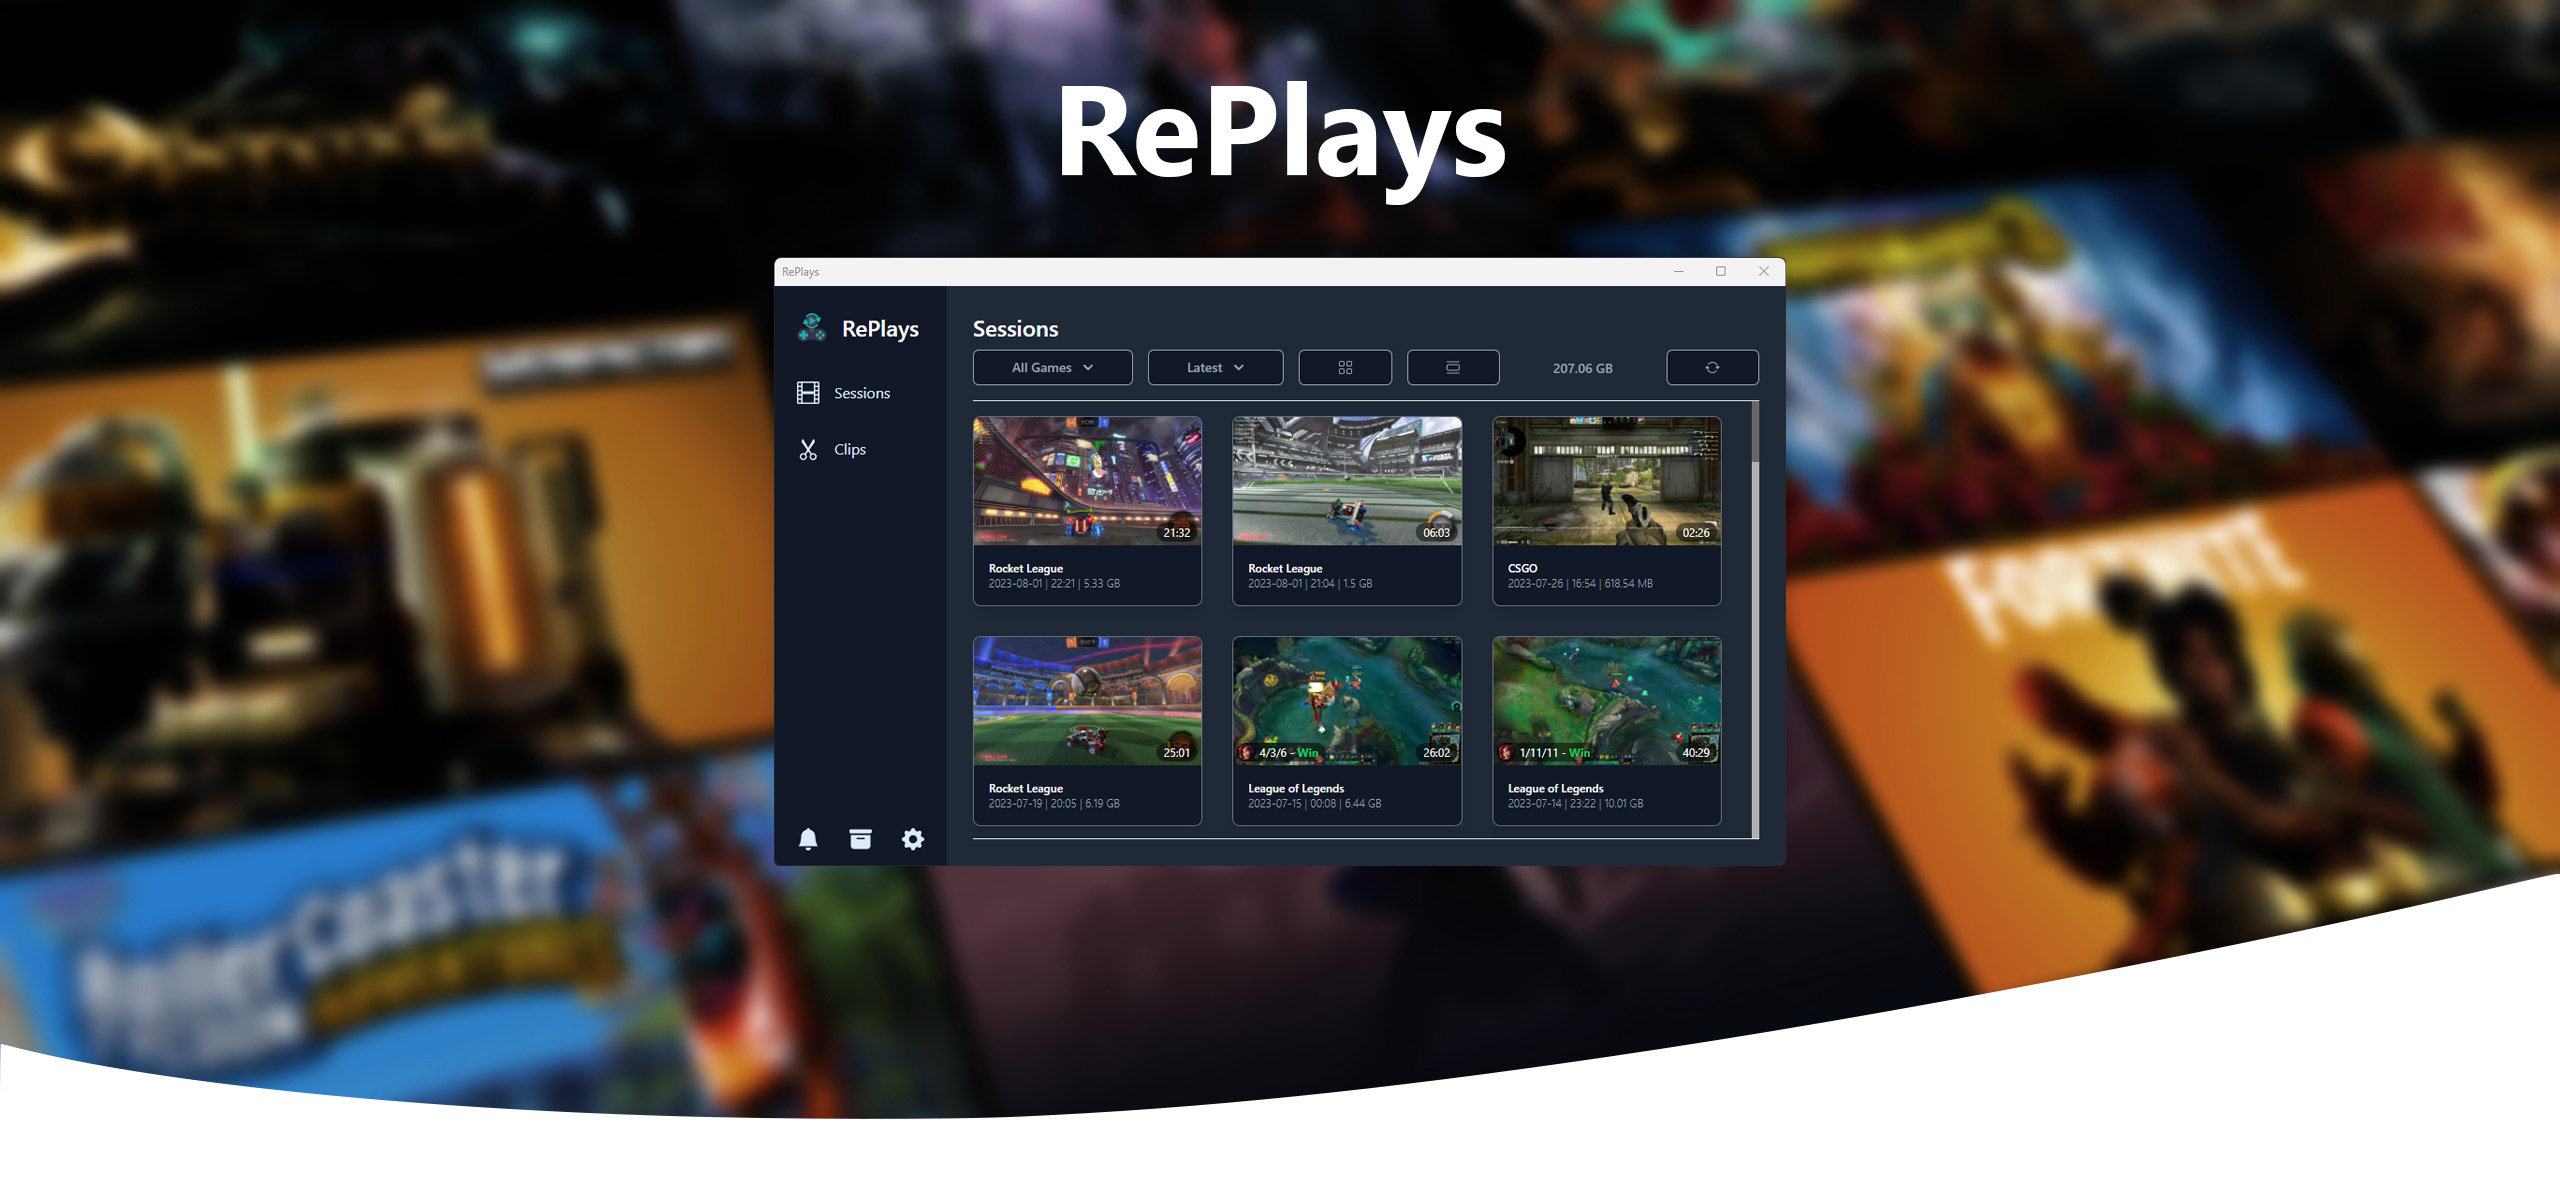 RePlays application